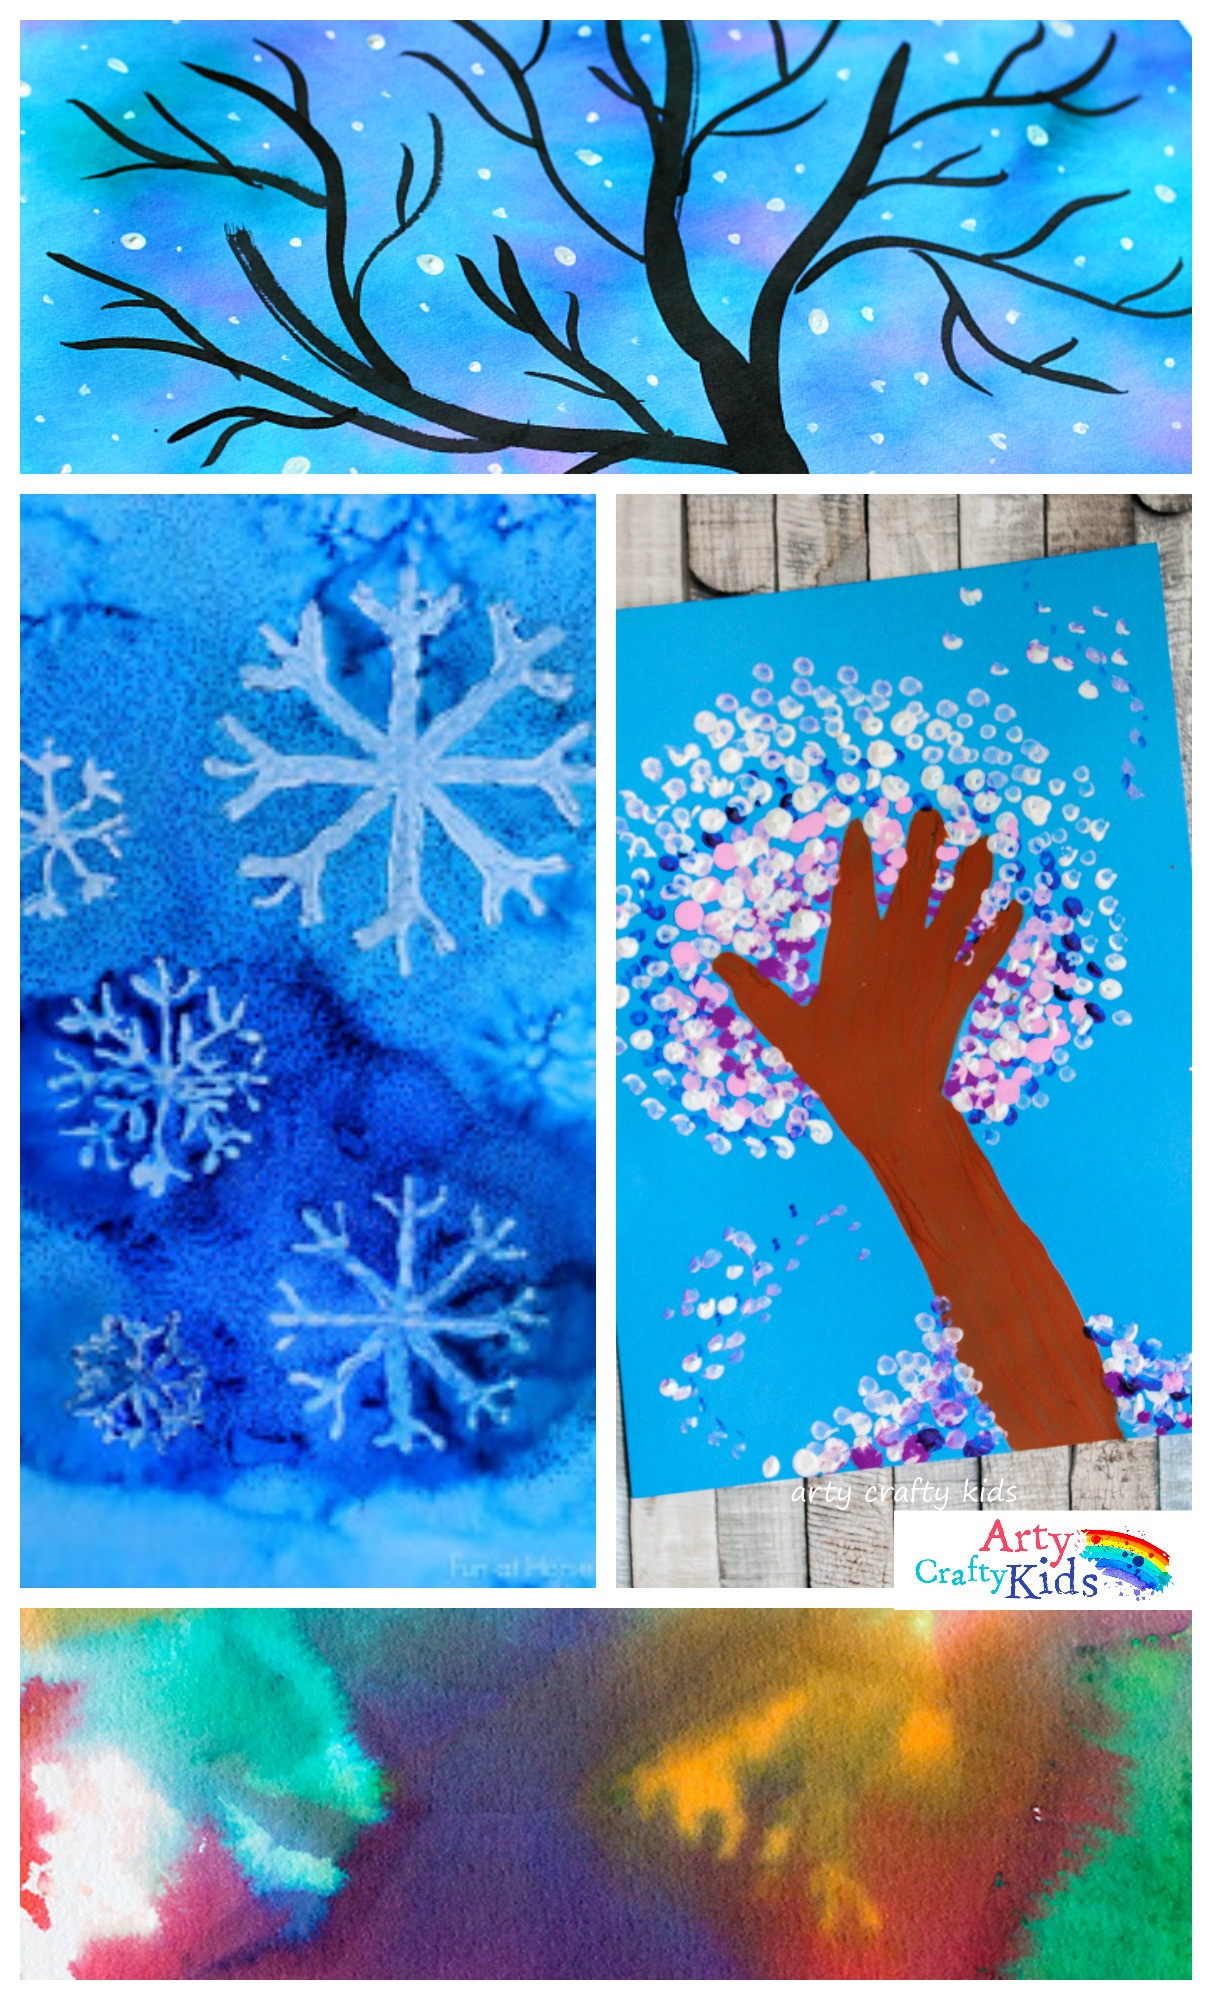 Winter Art Activities For Toddlers
 14 Wonderful Winter Art Projects for Kids Arty Crafty Kids